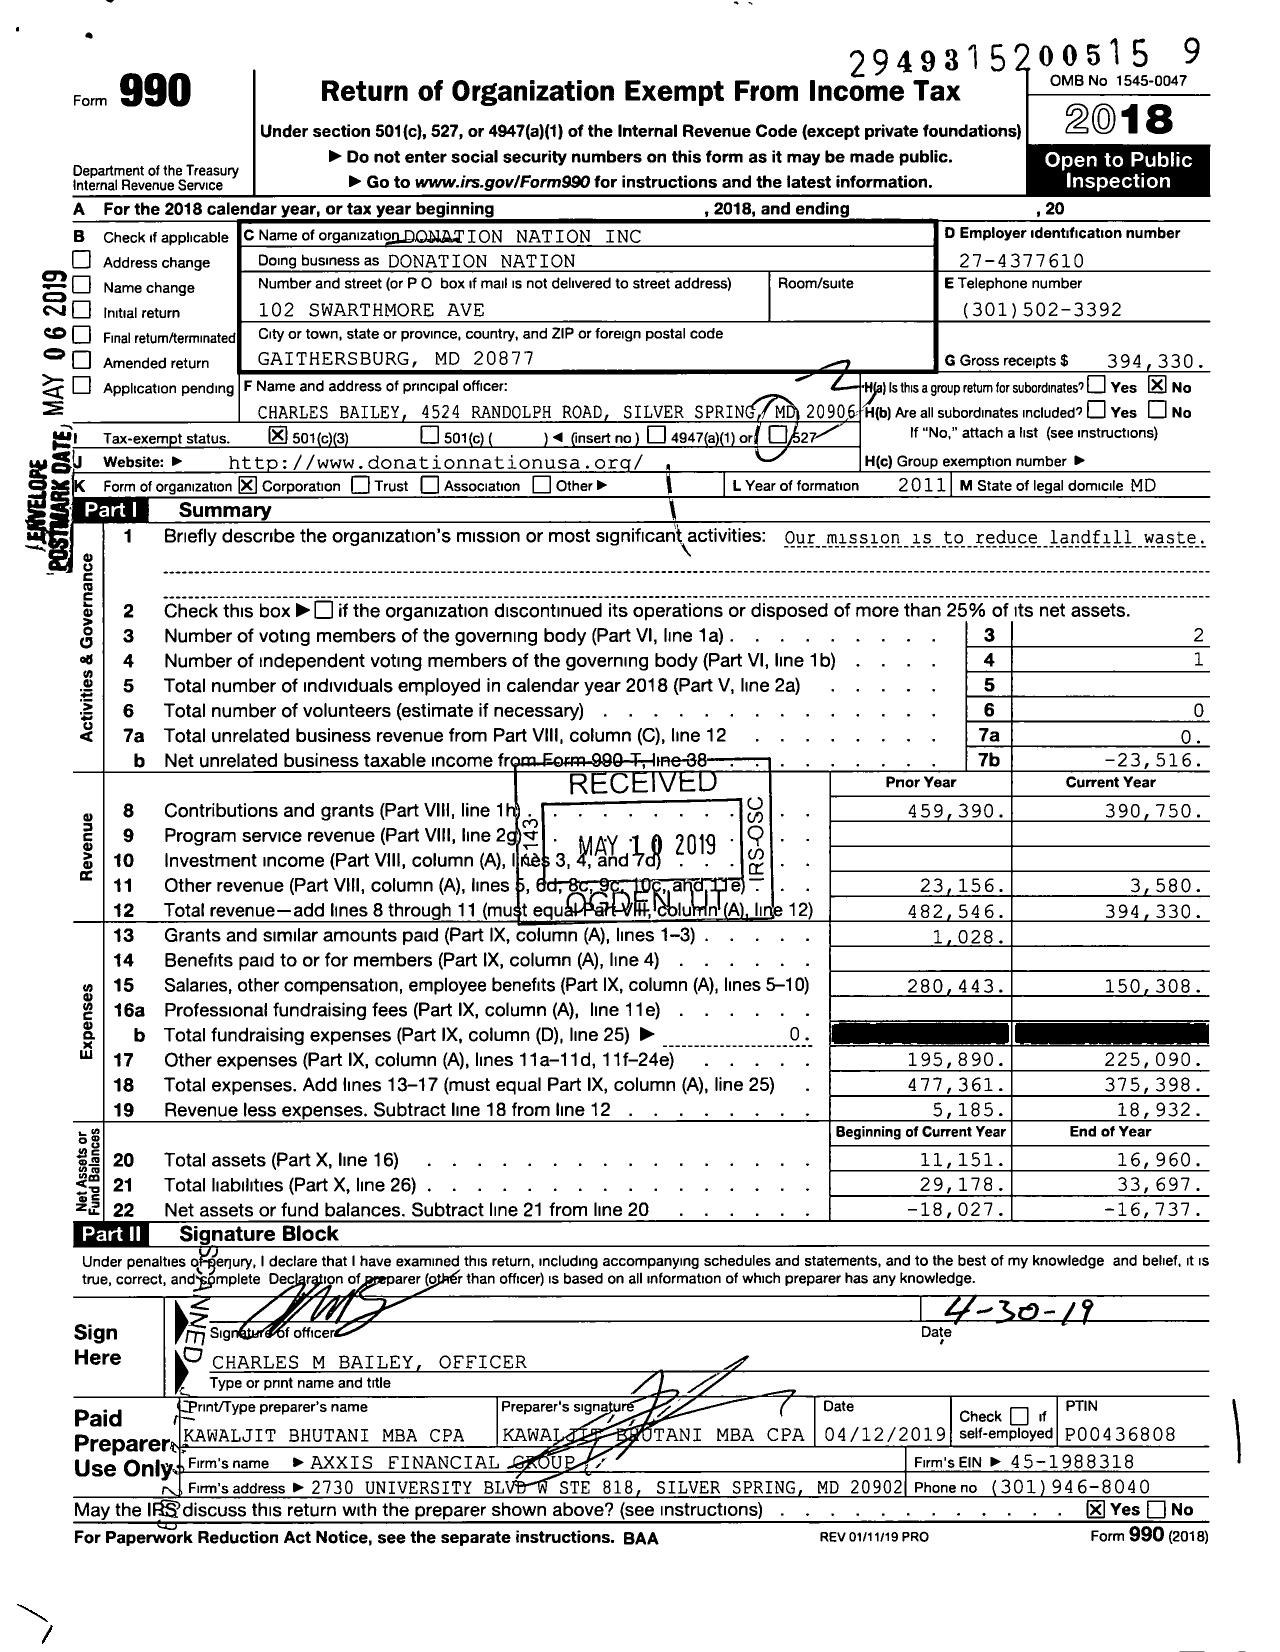 Image of first page of 2018 Form 990 for Donation Nation